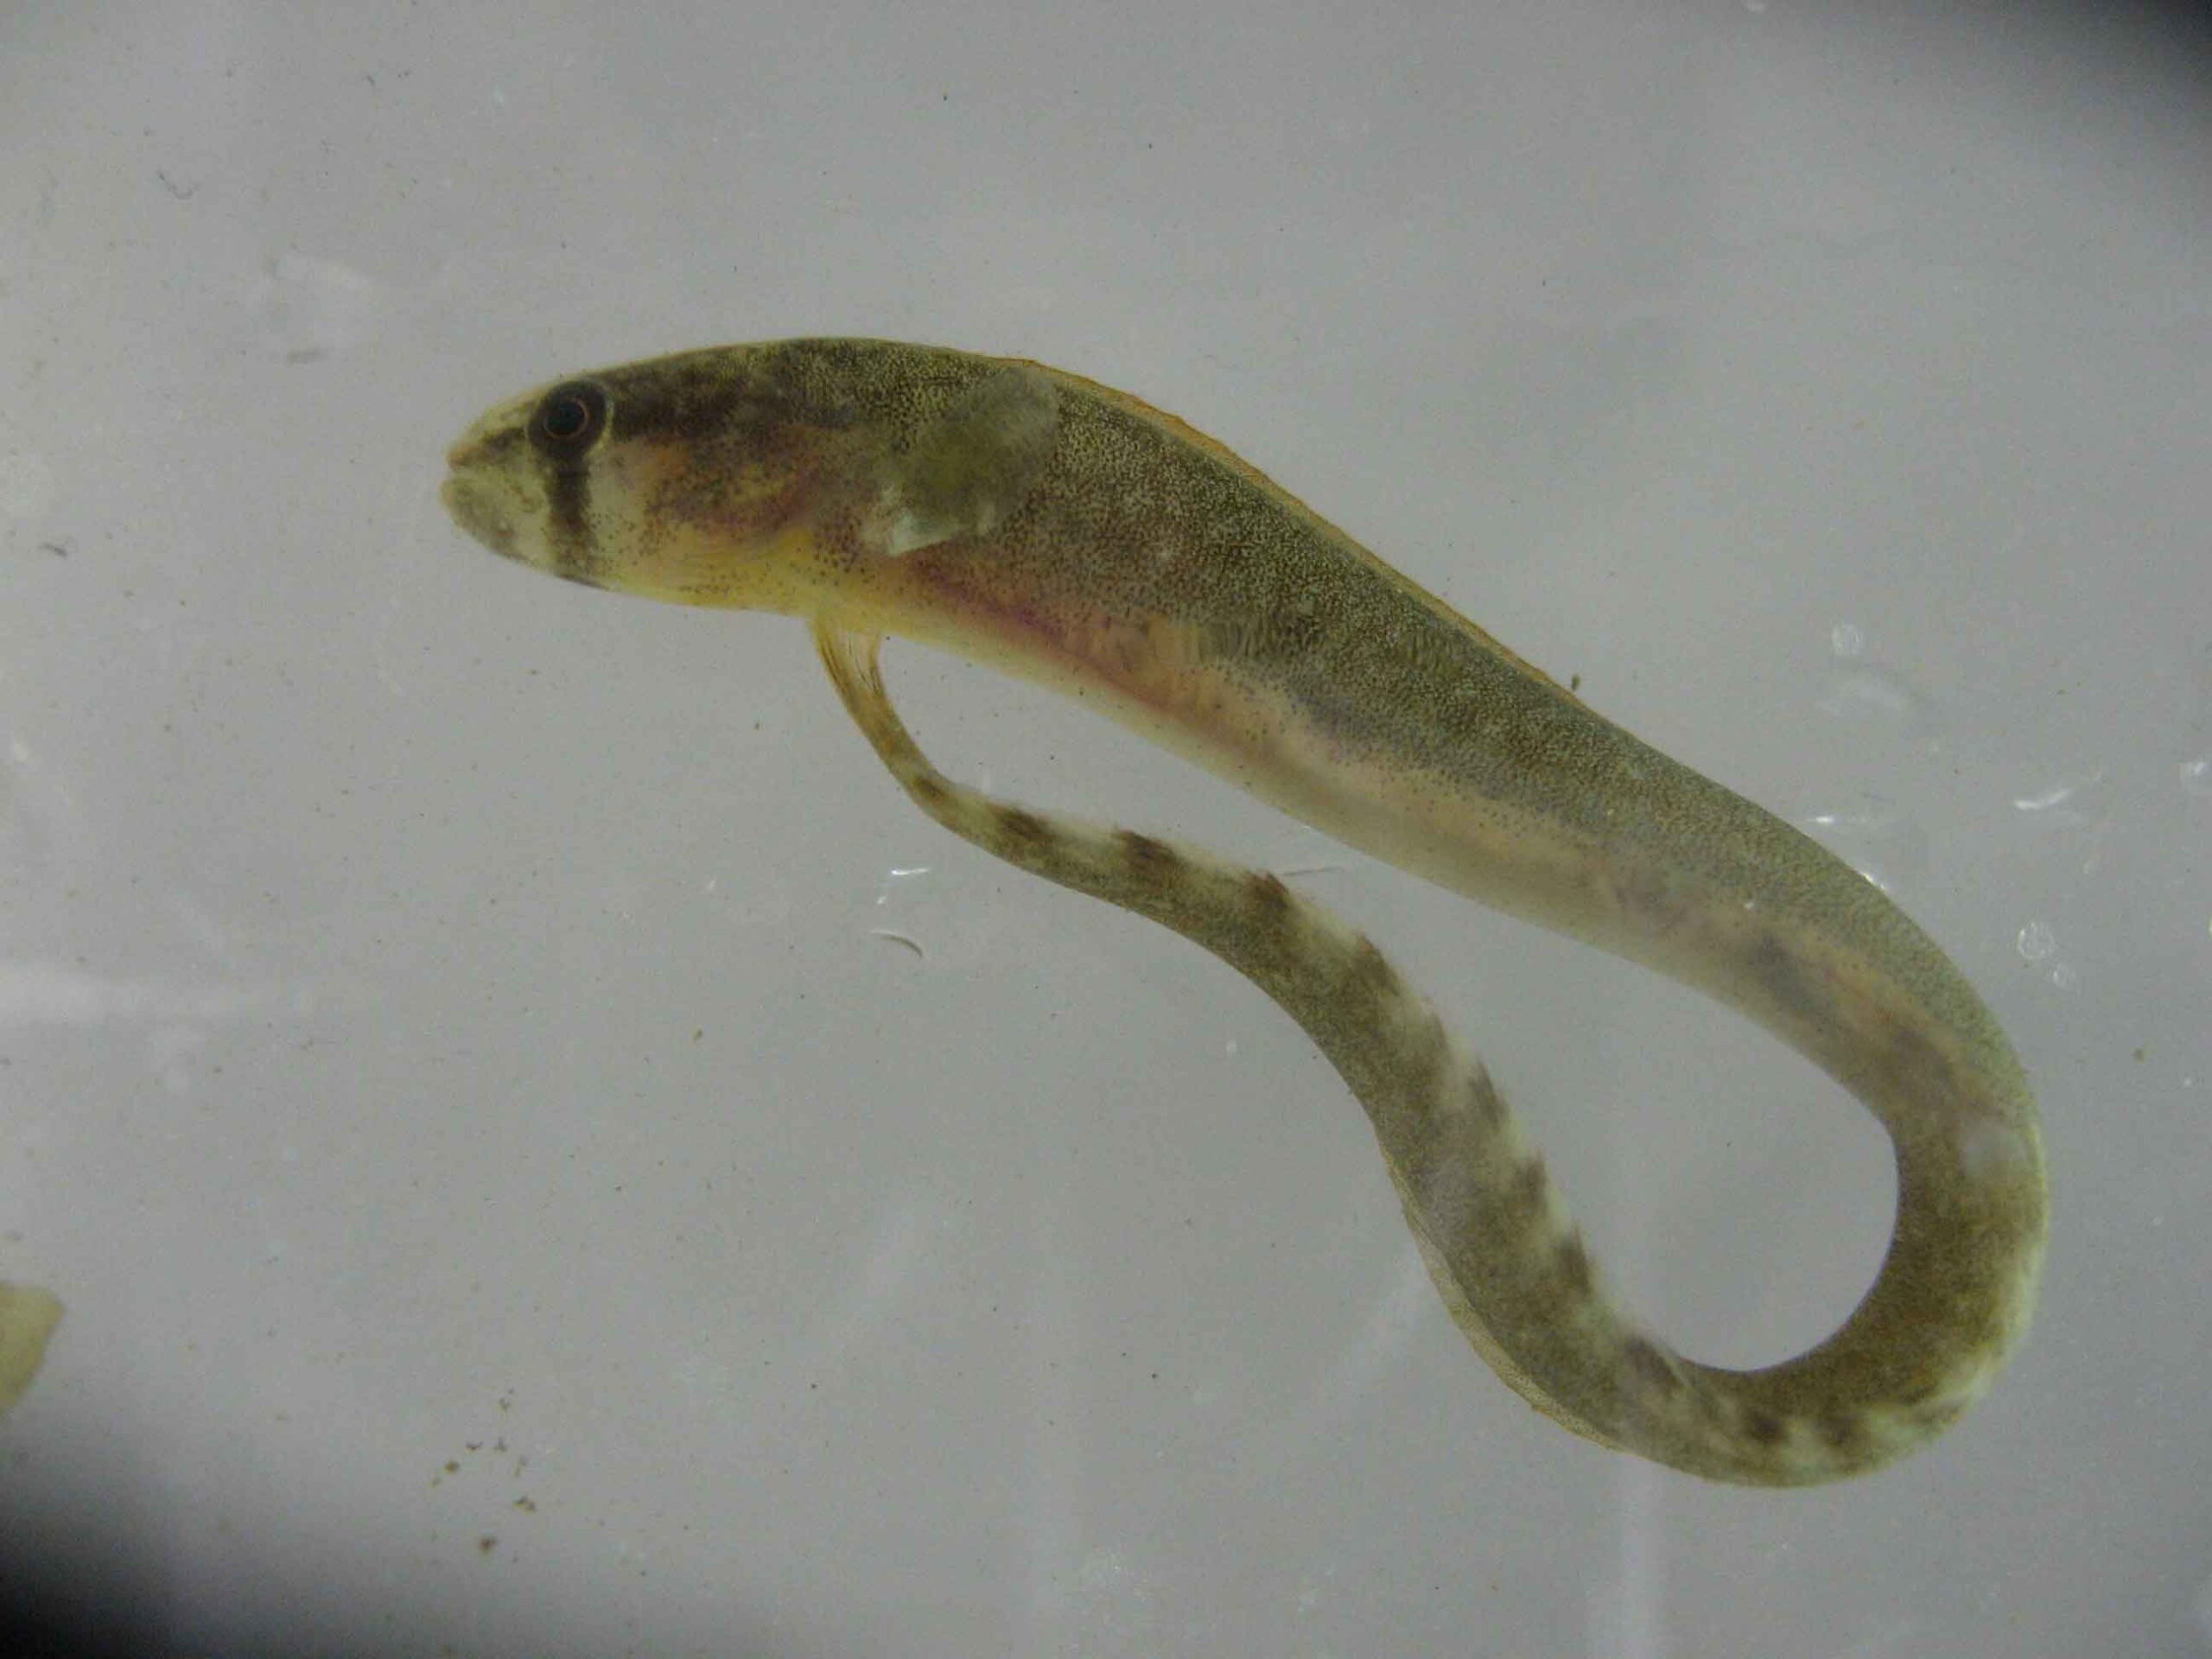 A Rock Gunnel fish with tail curved around its body